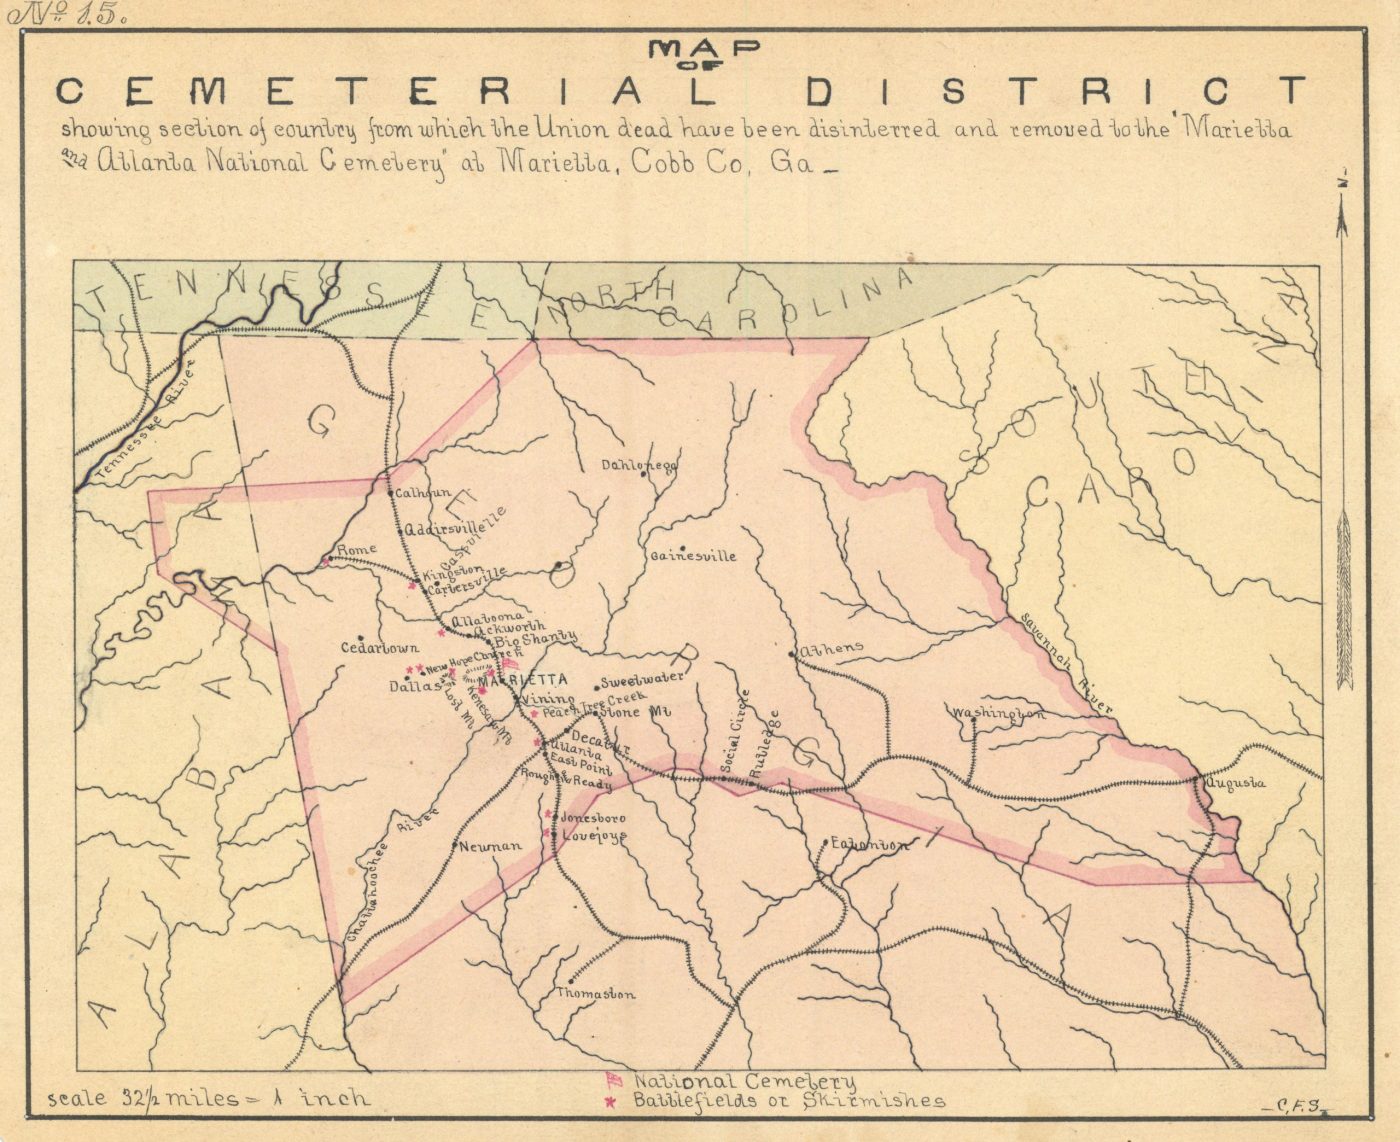 Map of the Cemeterial District in Georgia and sketch of Natchez National Cemetery in Mississippi. (National Archives)